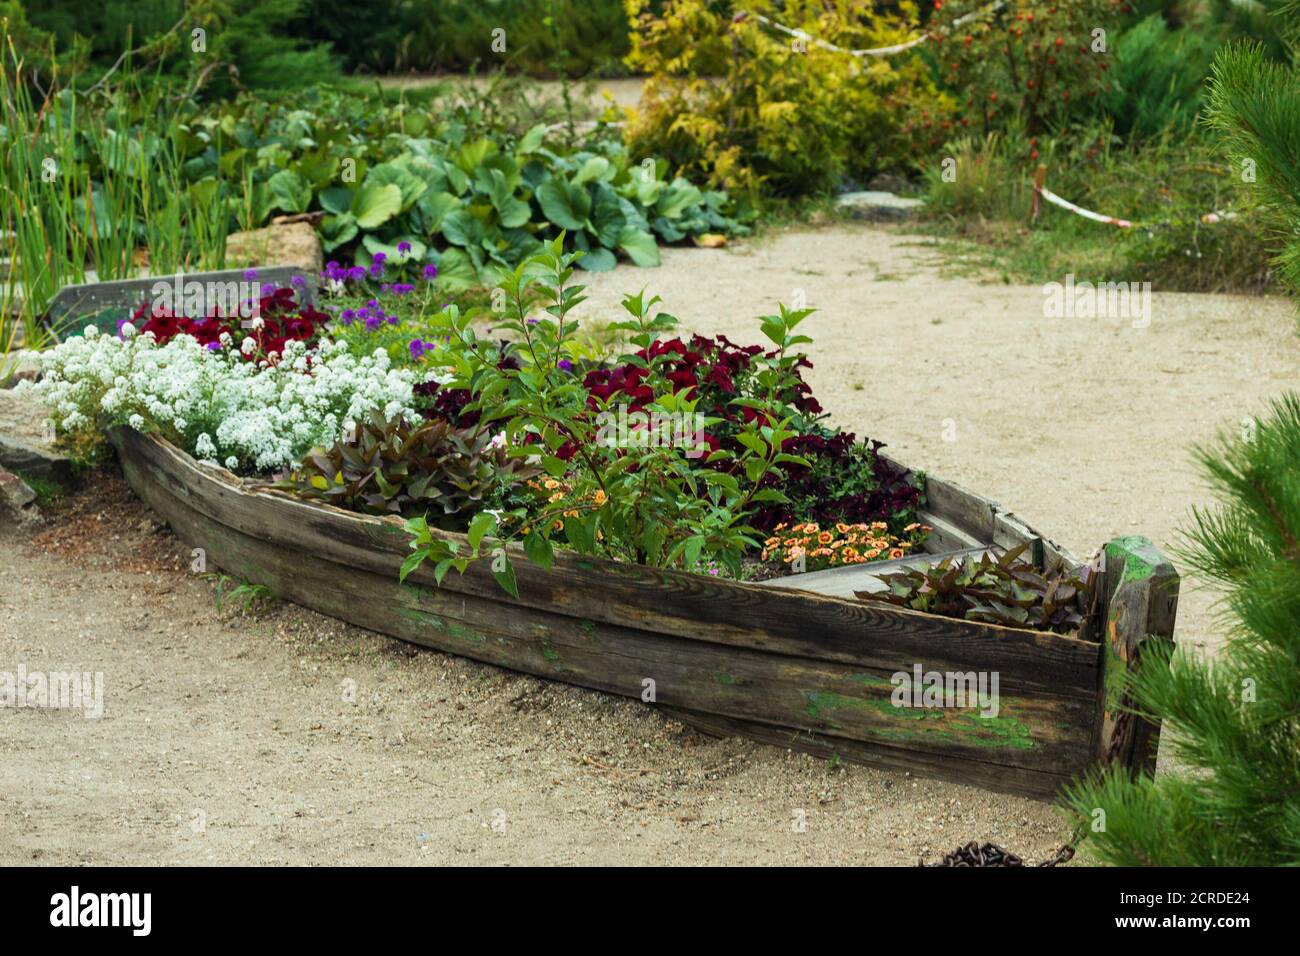 Beautifully designed flowerbed in the form of a boat of flowers of different colors. Stock Photo